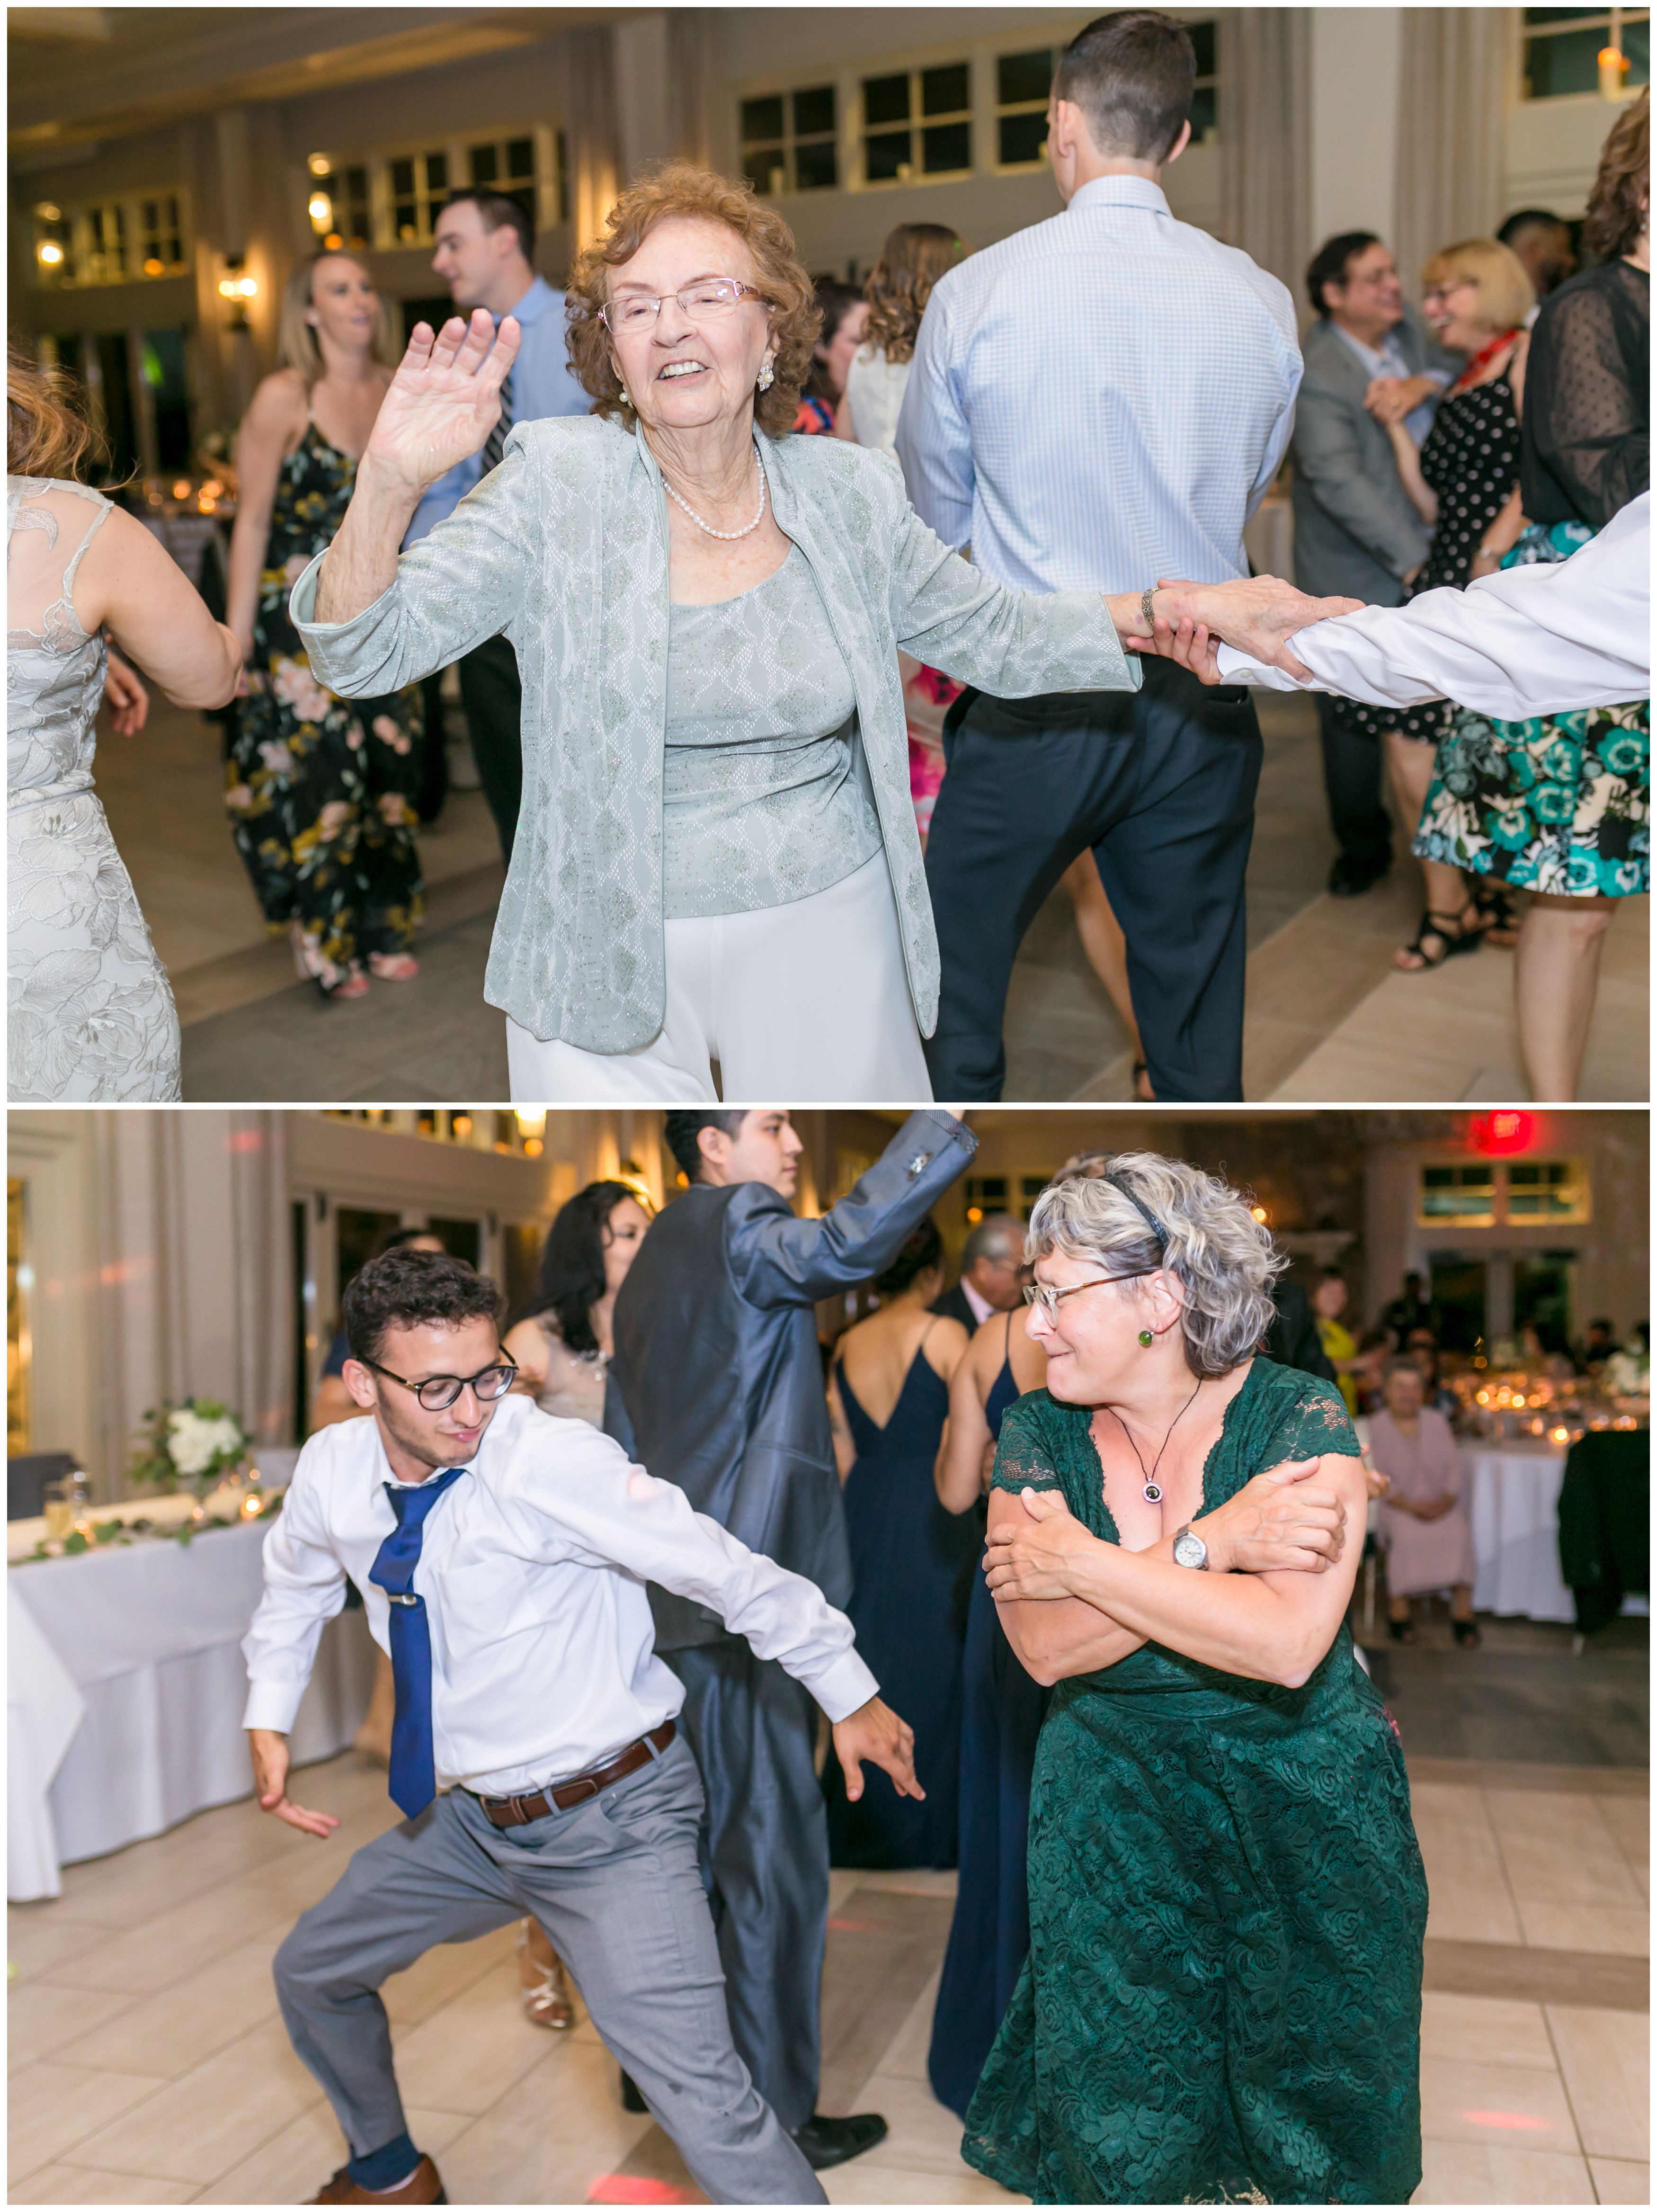 Dancing photos at the Indian Trail Club